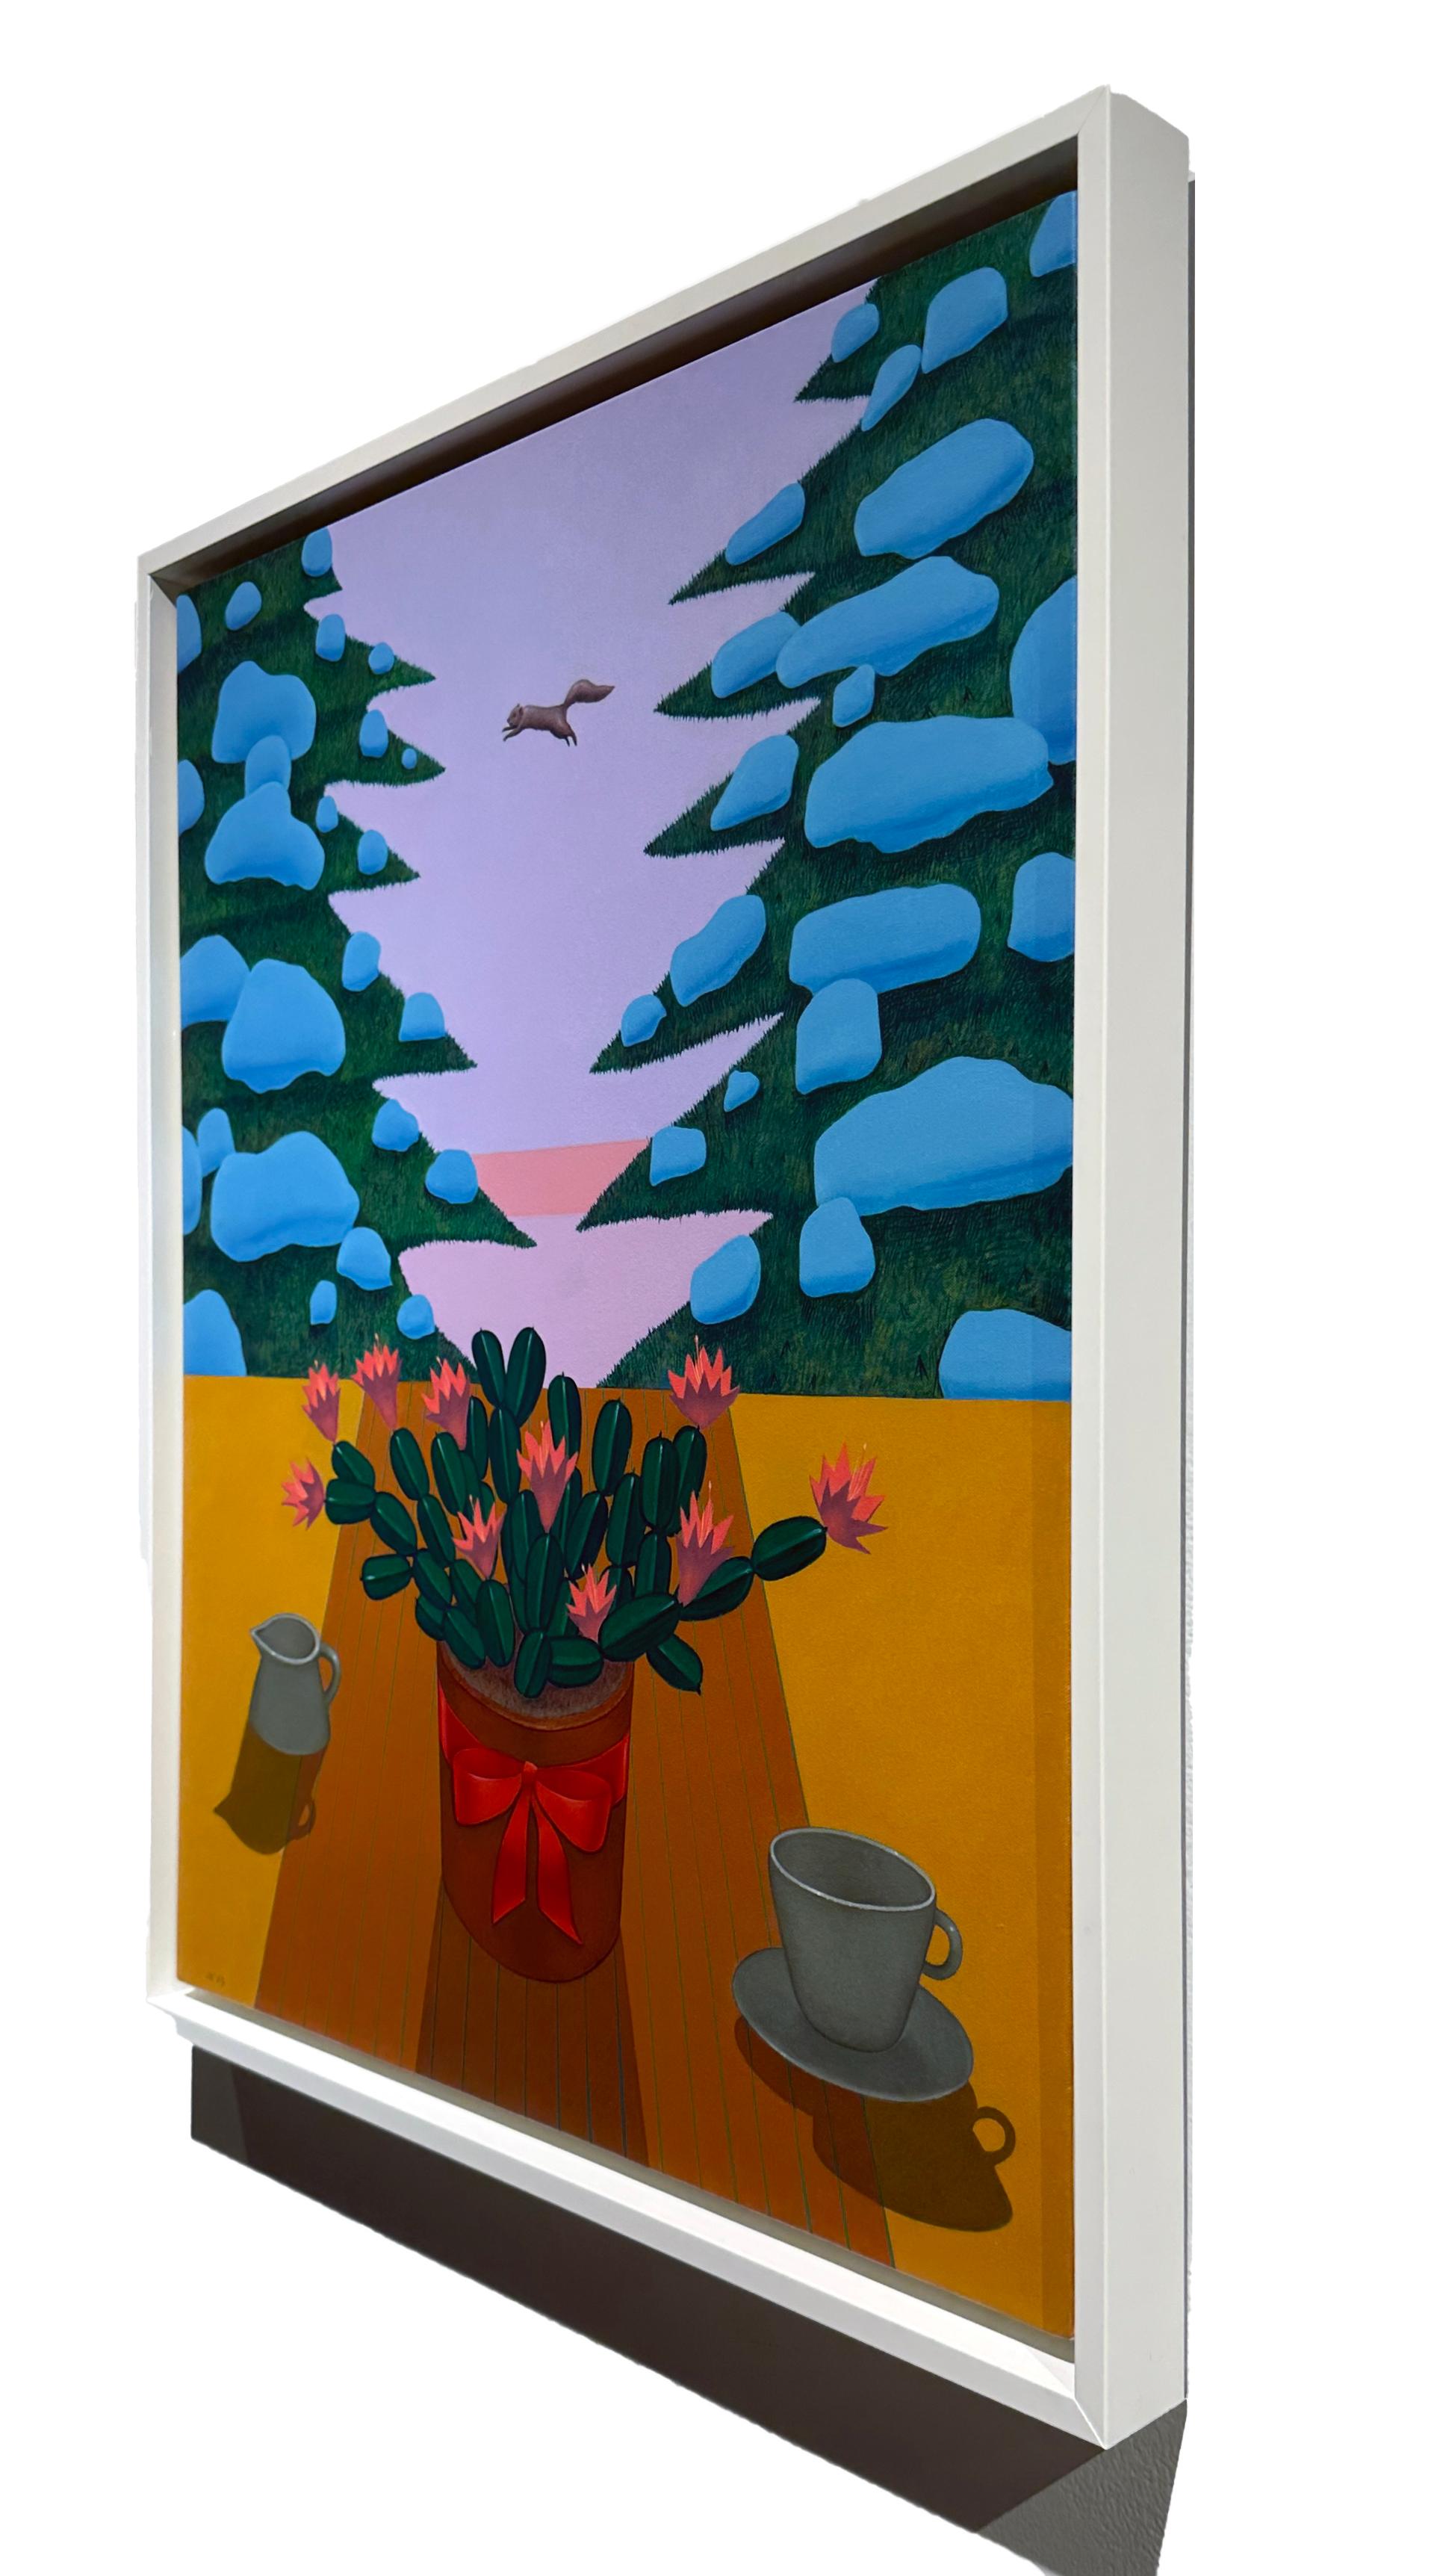 Desert cactus, in full bloom, sit atop a table scape while a squirrel leaps between snow covered pines in the background in John Hrehov's painting titled 